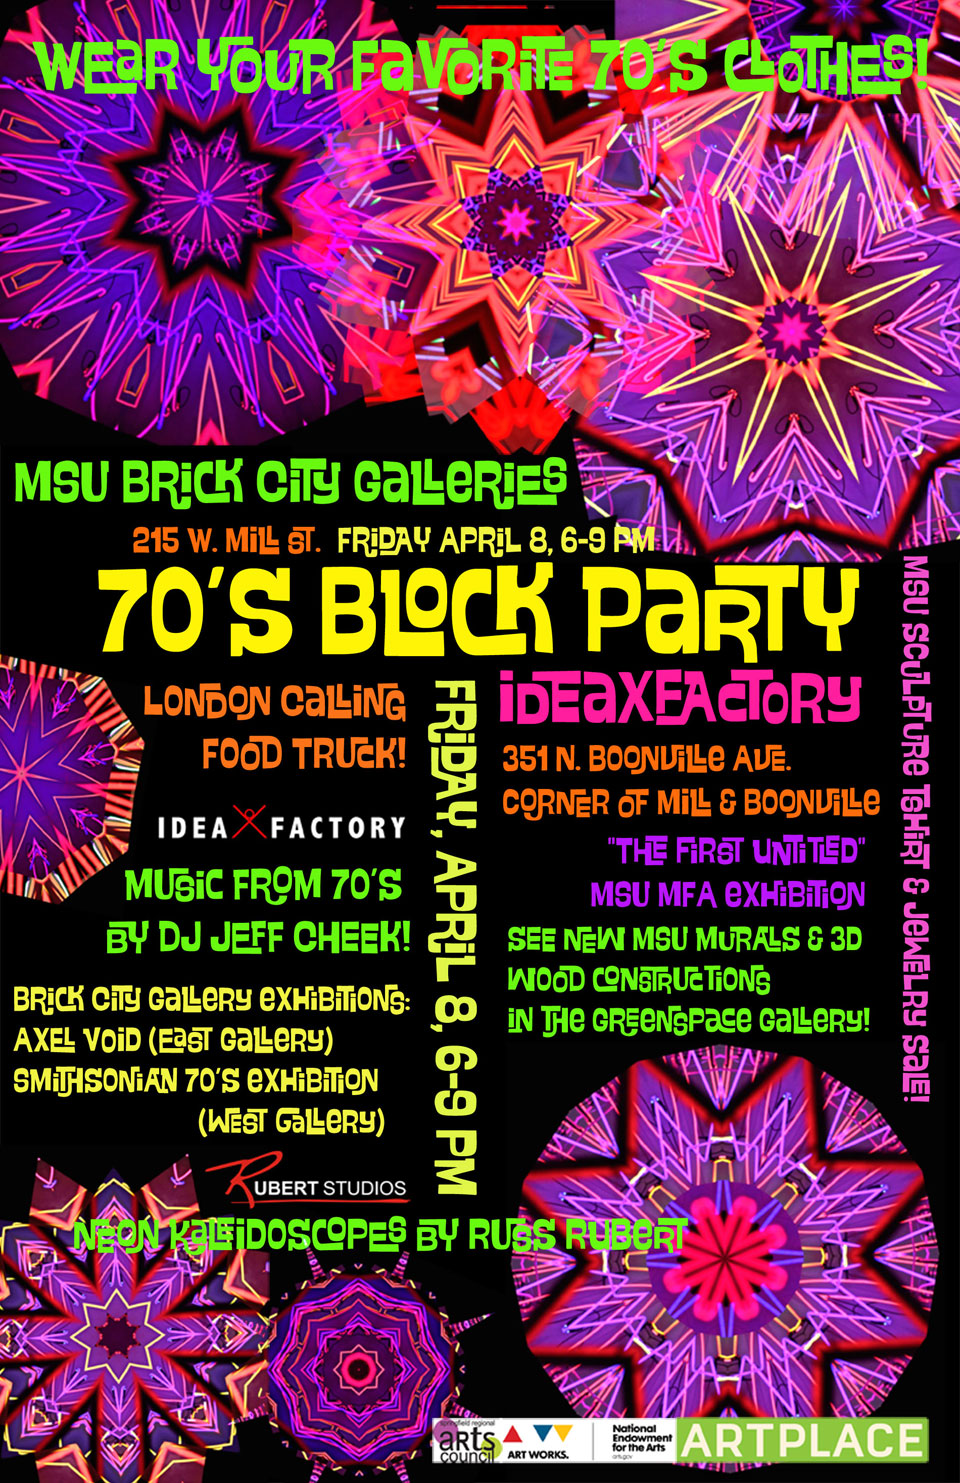 70’s Block Party at ideaXfactory & Brick City Galleries